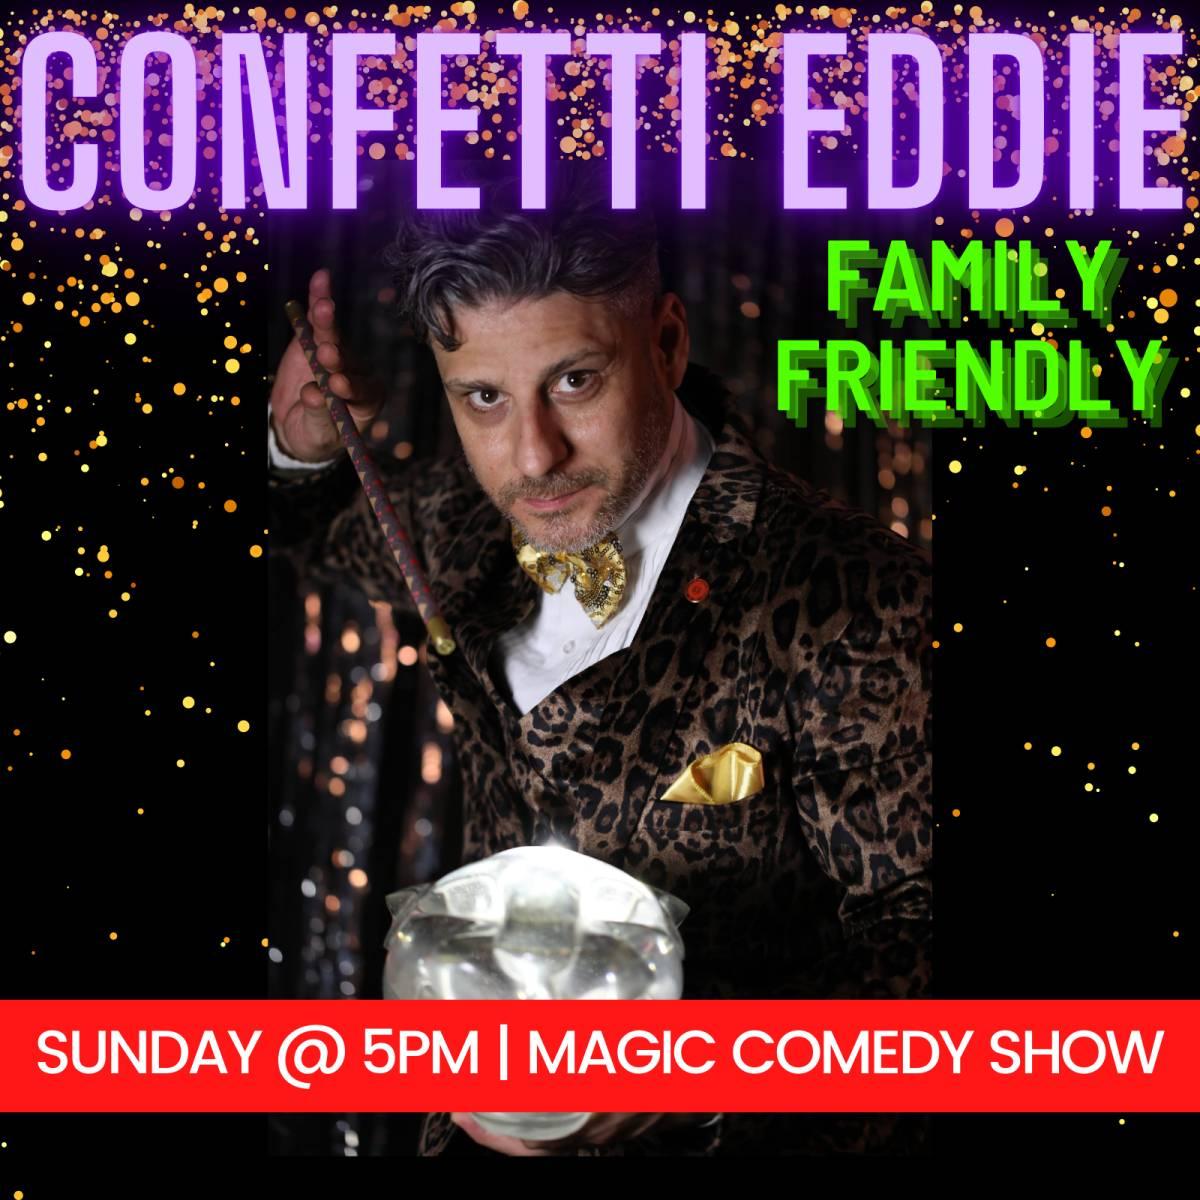 Silly Sunday Tricks & Giggles with Confetti Eddie!